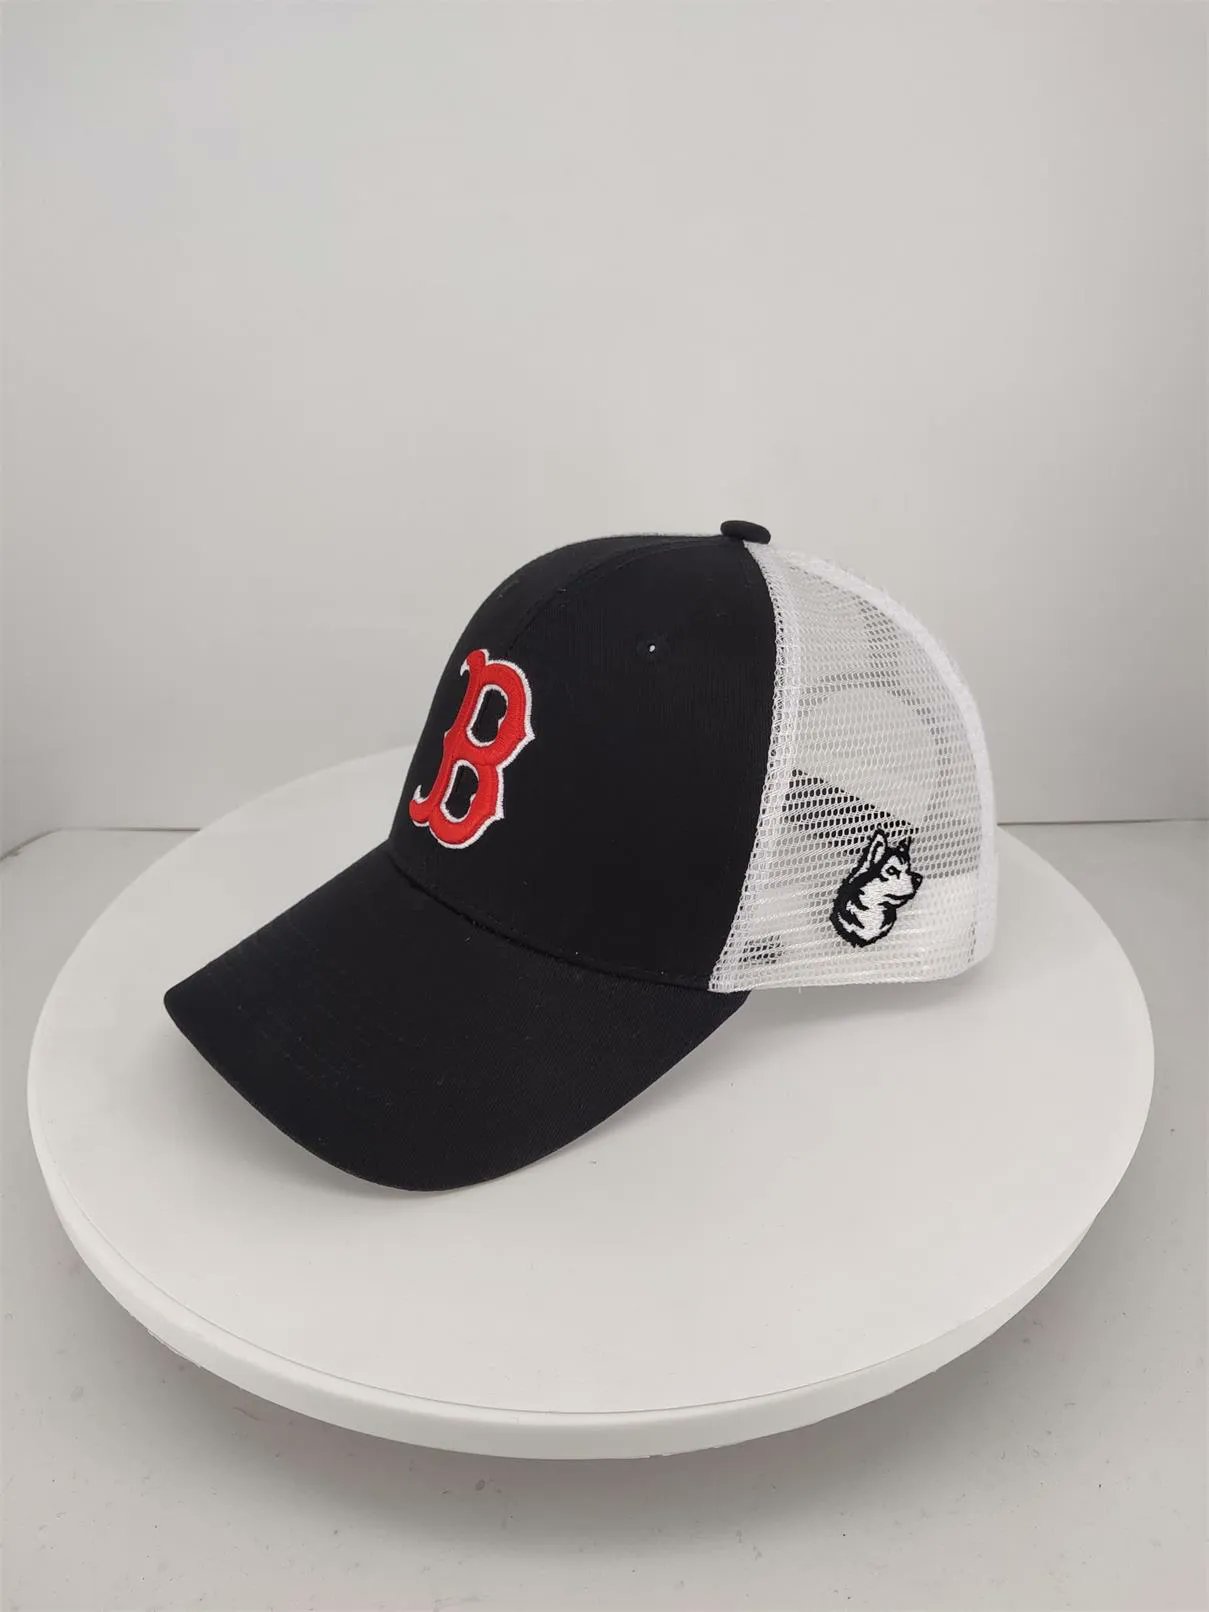 Northeastern Alumni on X: Join the Red Sox on Sept. 2 for the Zenni  College Series: Northeastern! Alumni, students, fans, and friends of NU who  buy tickets through this special offer will